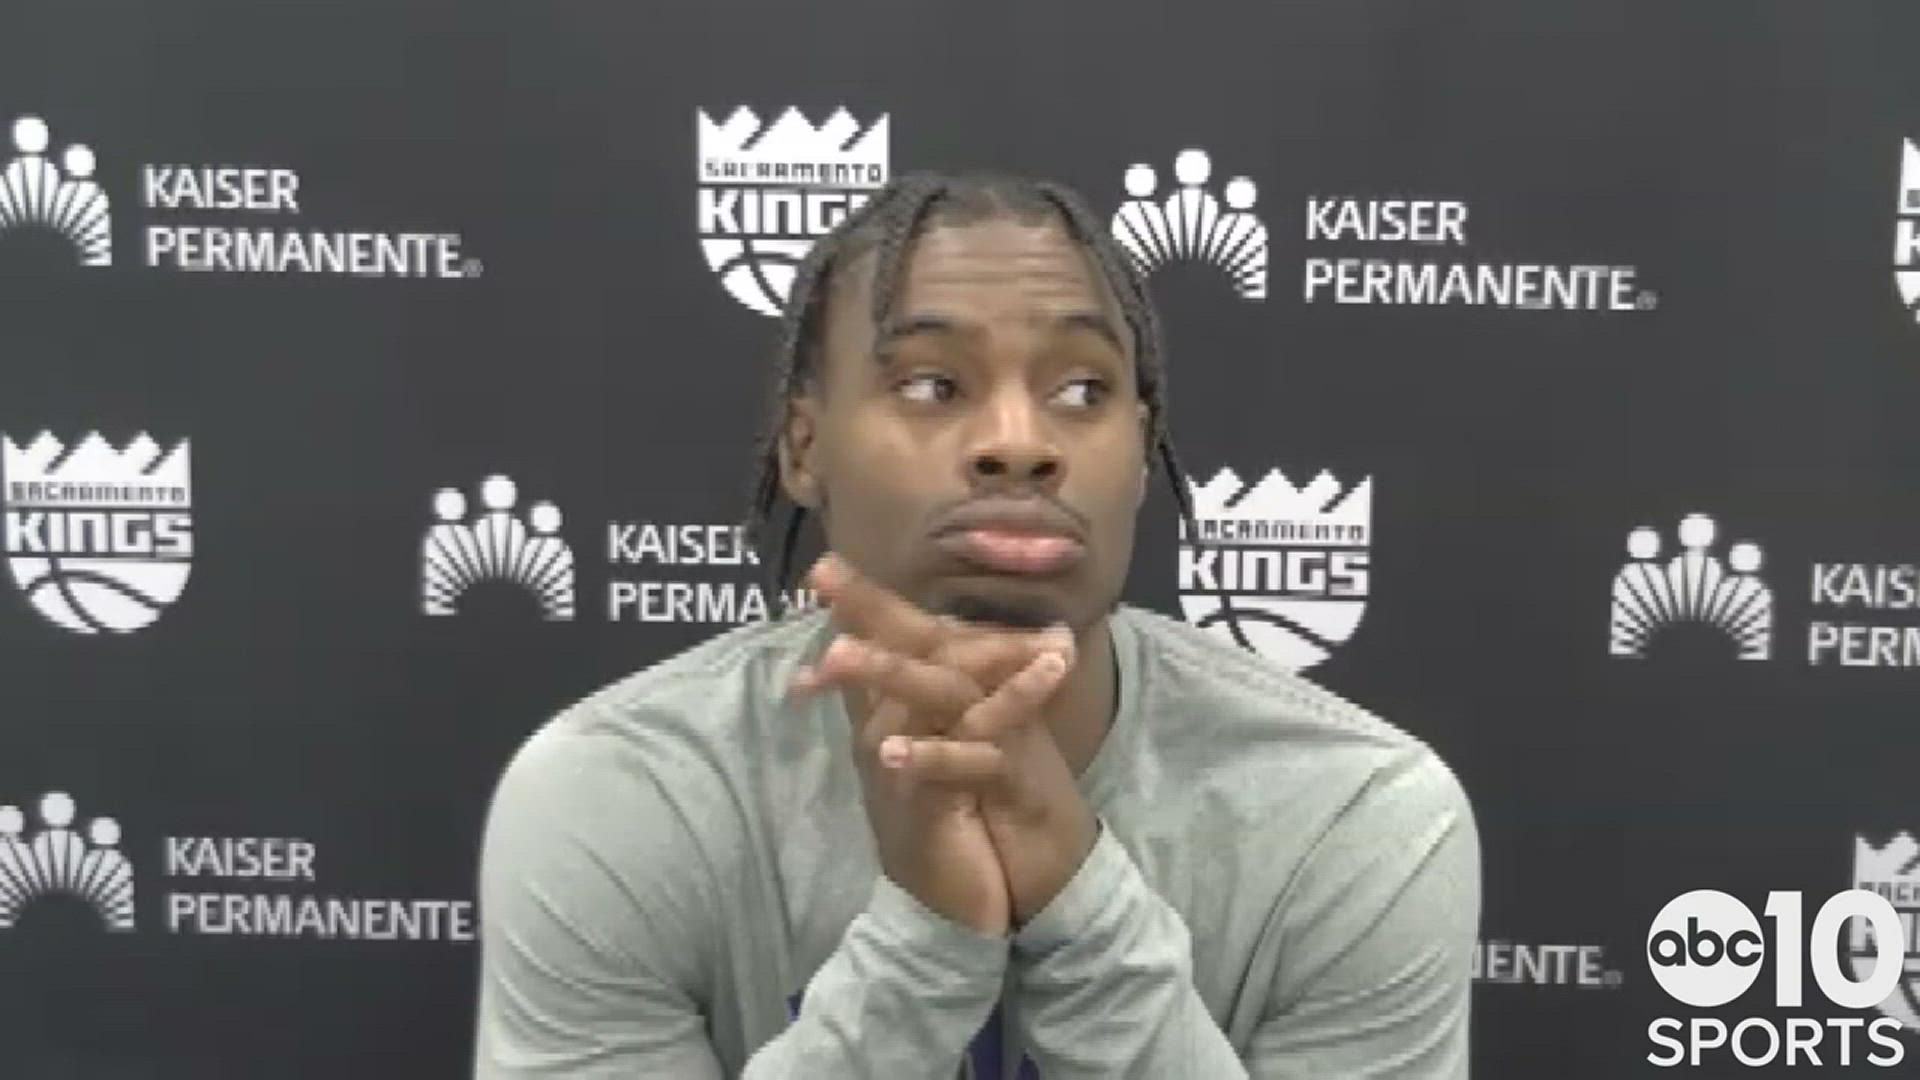 Following the Kings 116-109 victory over the Phoenix Suns in the season finale, Davion Mitchell talks about wrapping up his rookie season in the NBA.